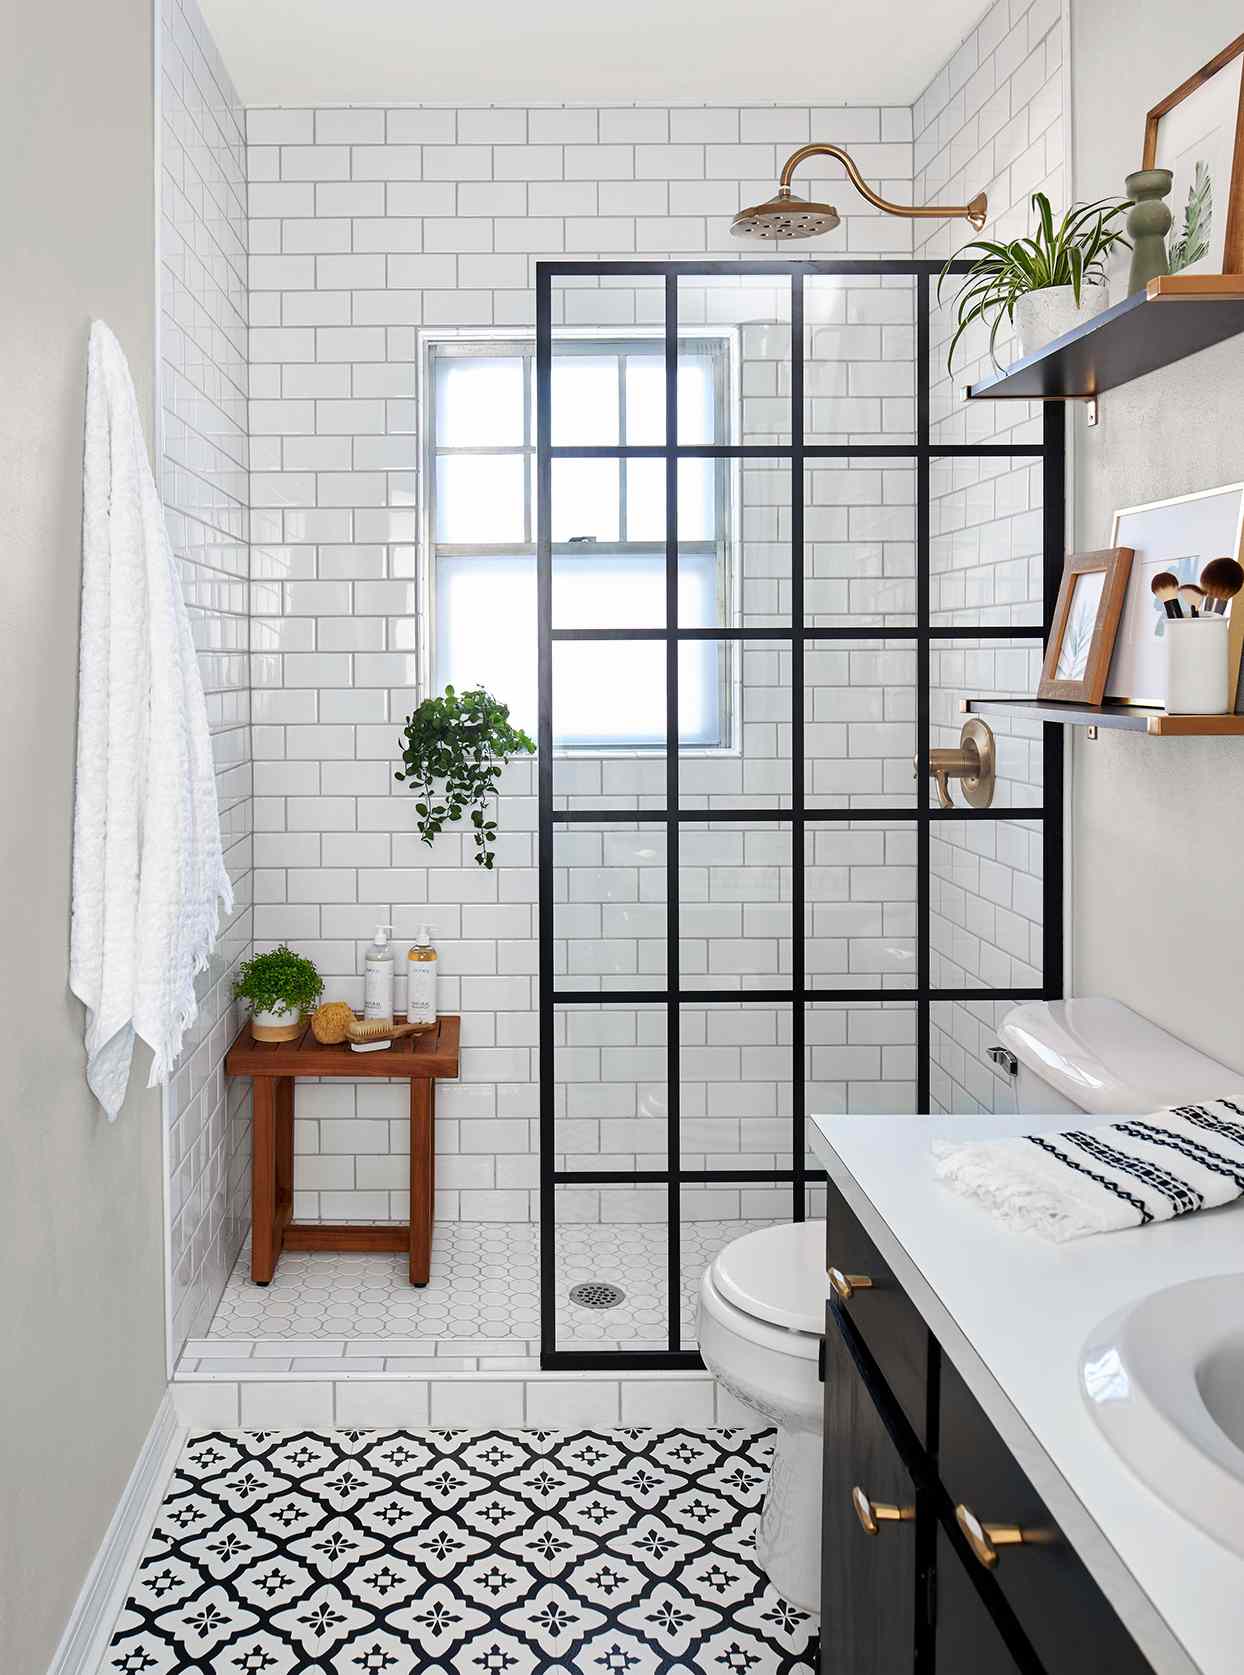 Before-and-After Small Bathroom Remodels That Showcase Stylish